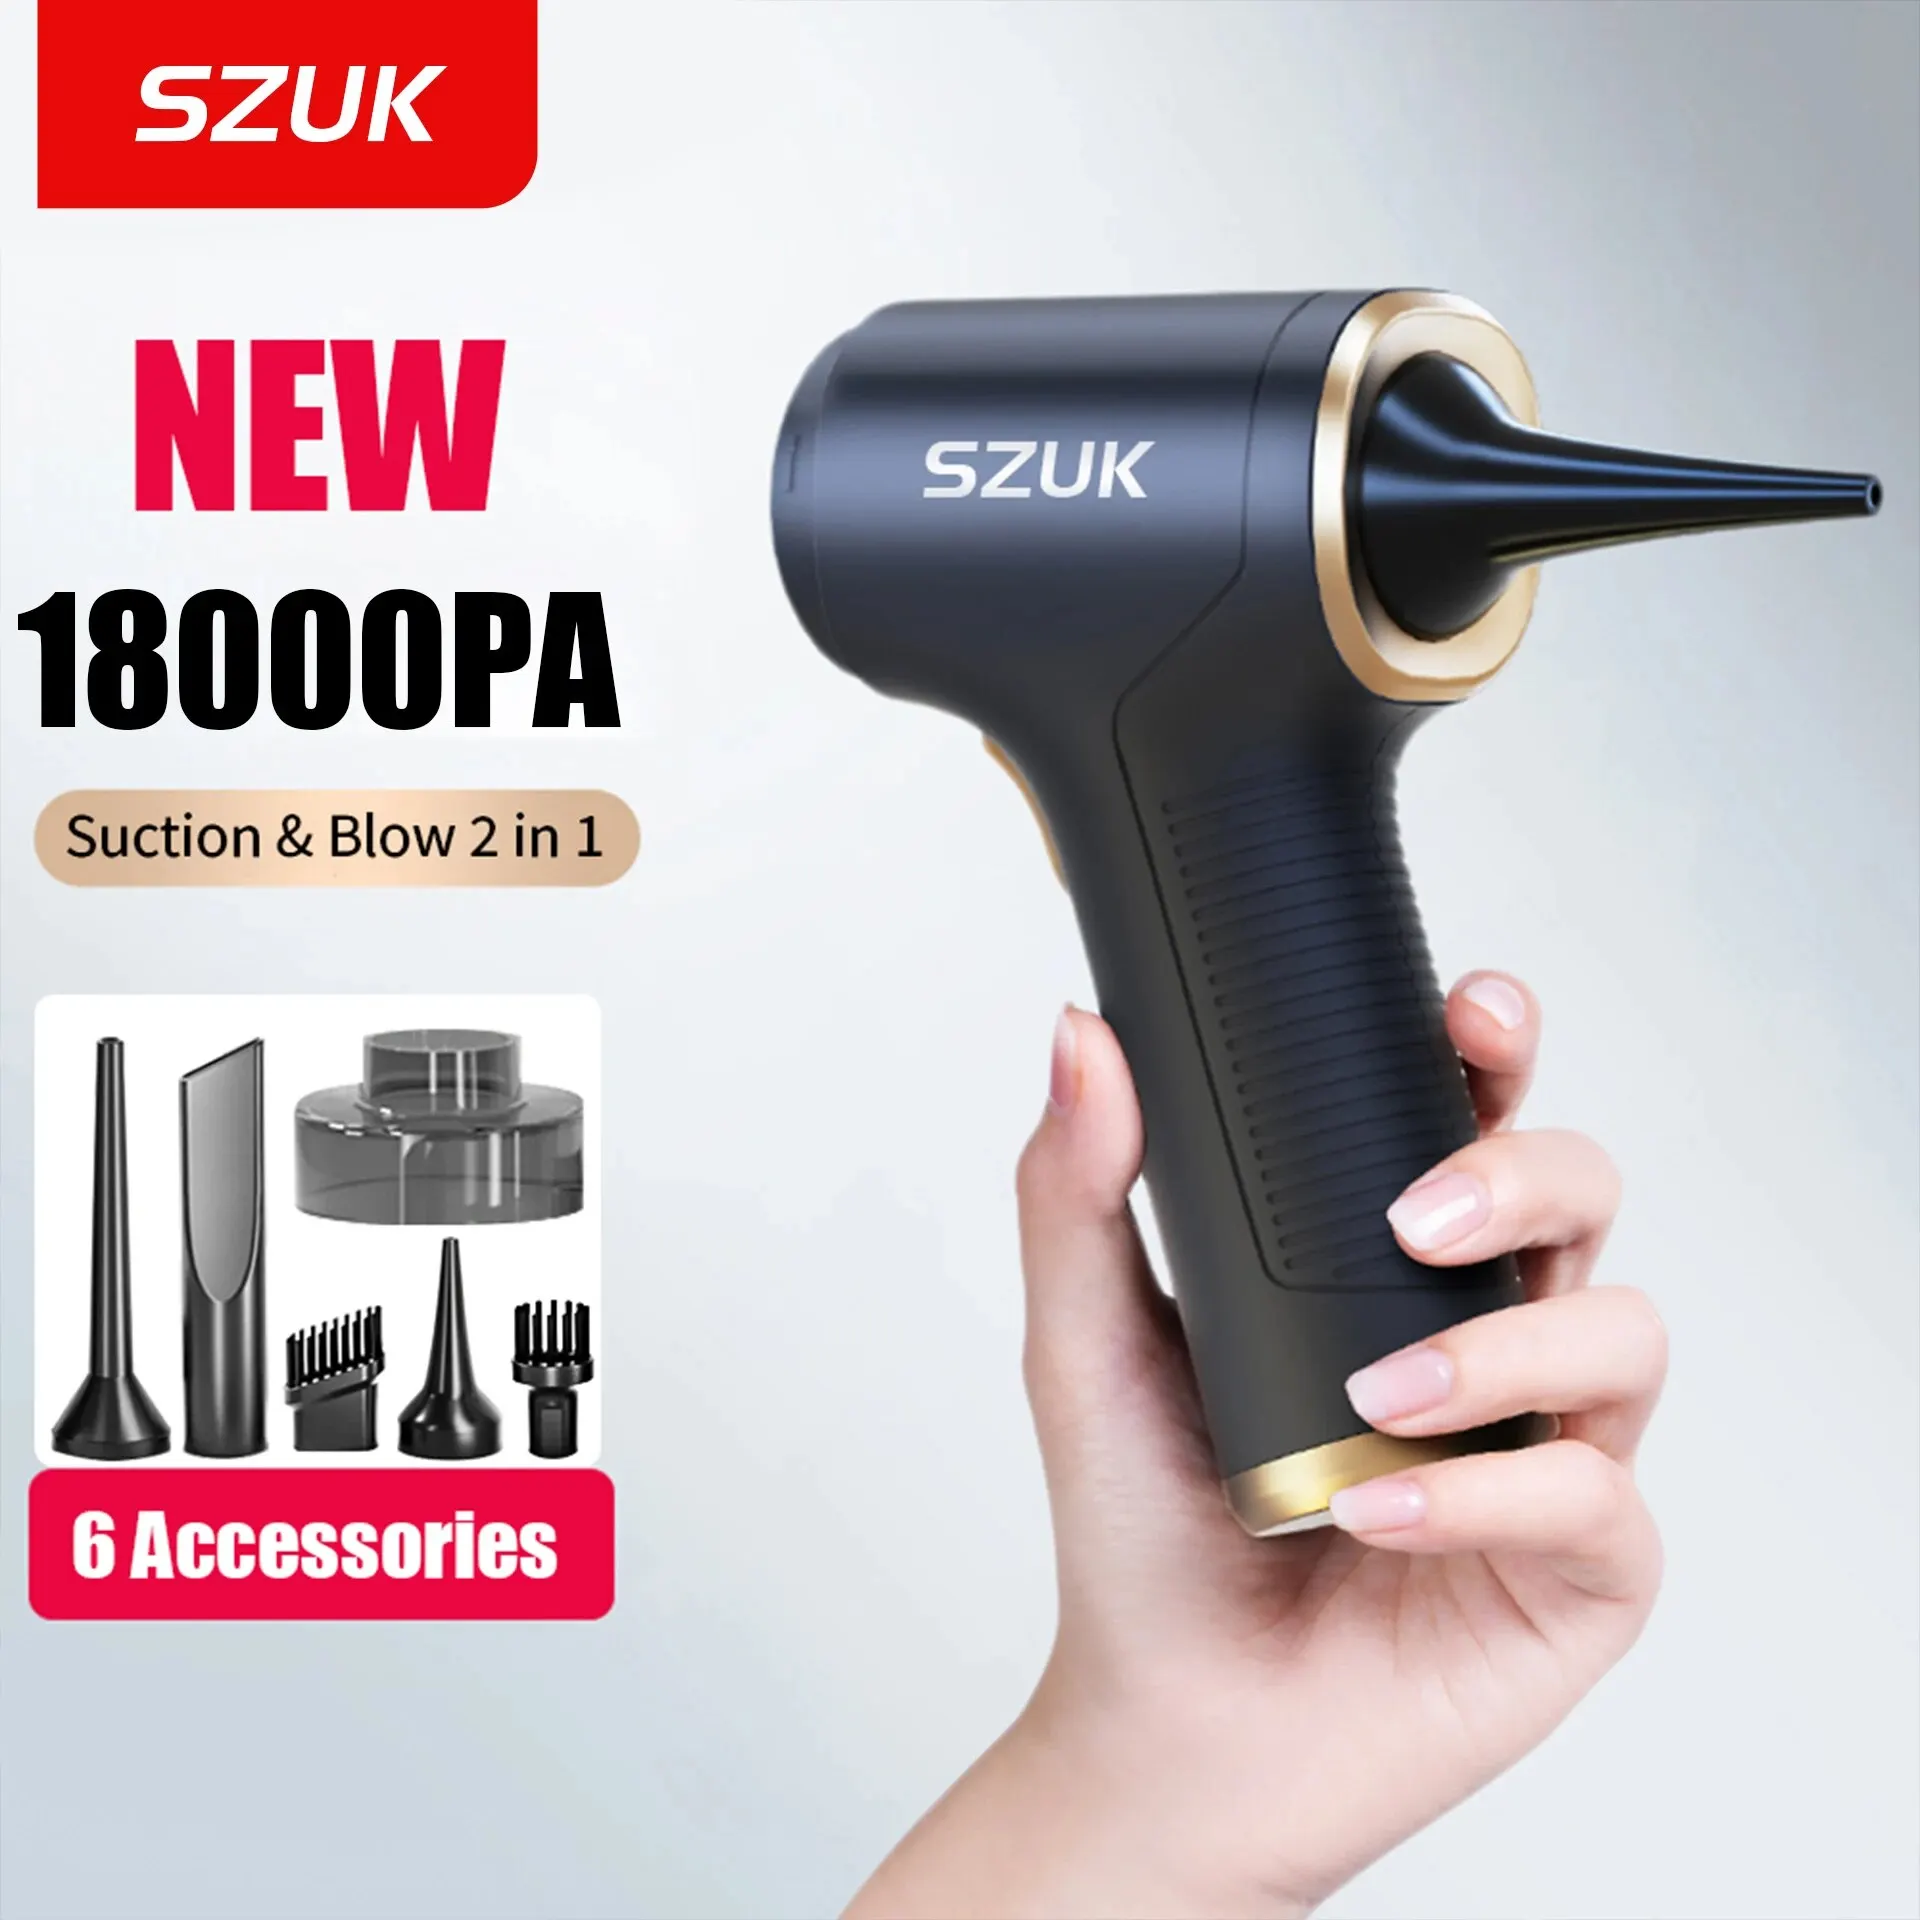 SZUK 18000PA Car Vacuum Cleaner Powerful 3 in 1 Brushless Motor Handheld Cordless Rechargeable Portable Mini Car Vacuum Cleaner with Multi-nozzles and Floor Brush for Car Home Pet Hair Cleaning 23